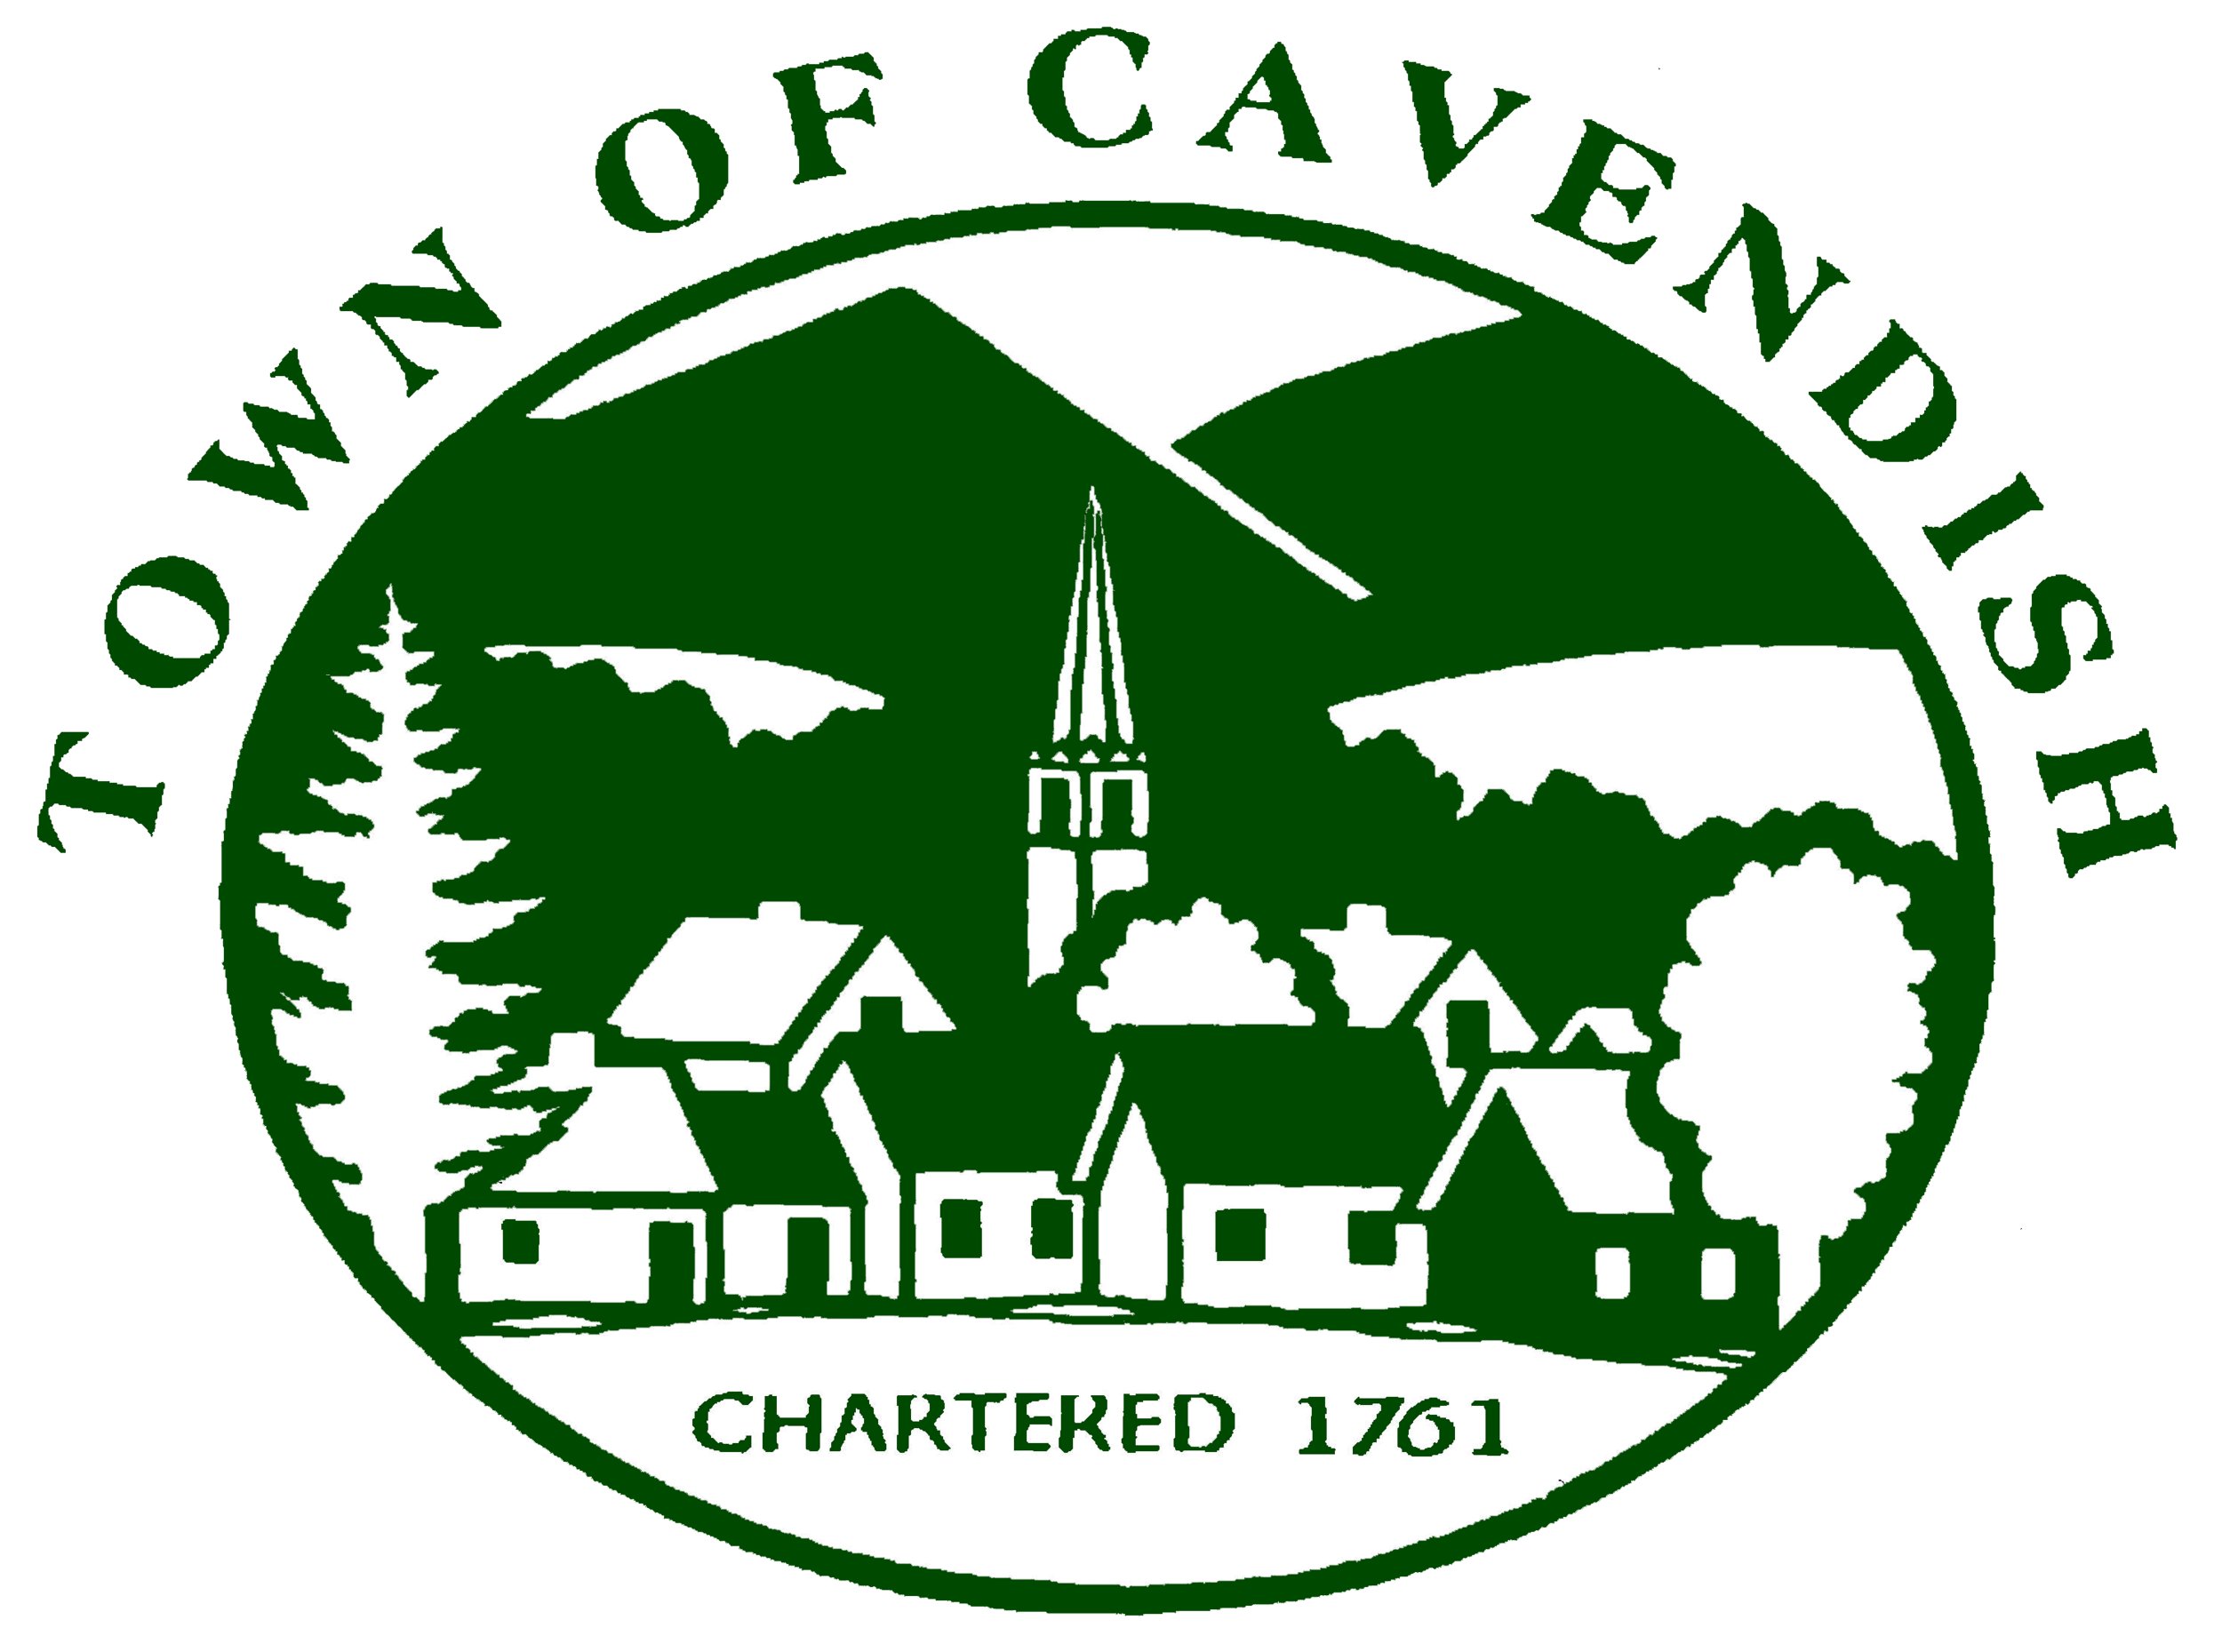 Town of Cavendish, Vermont